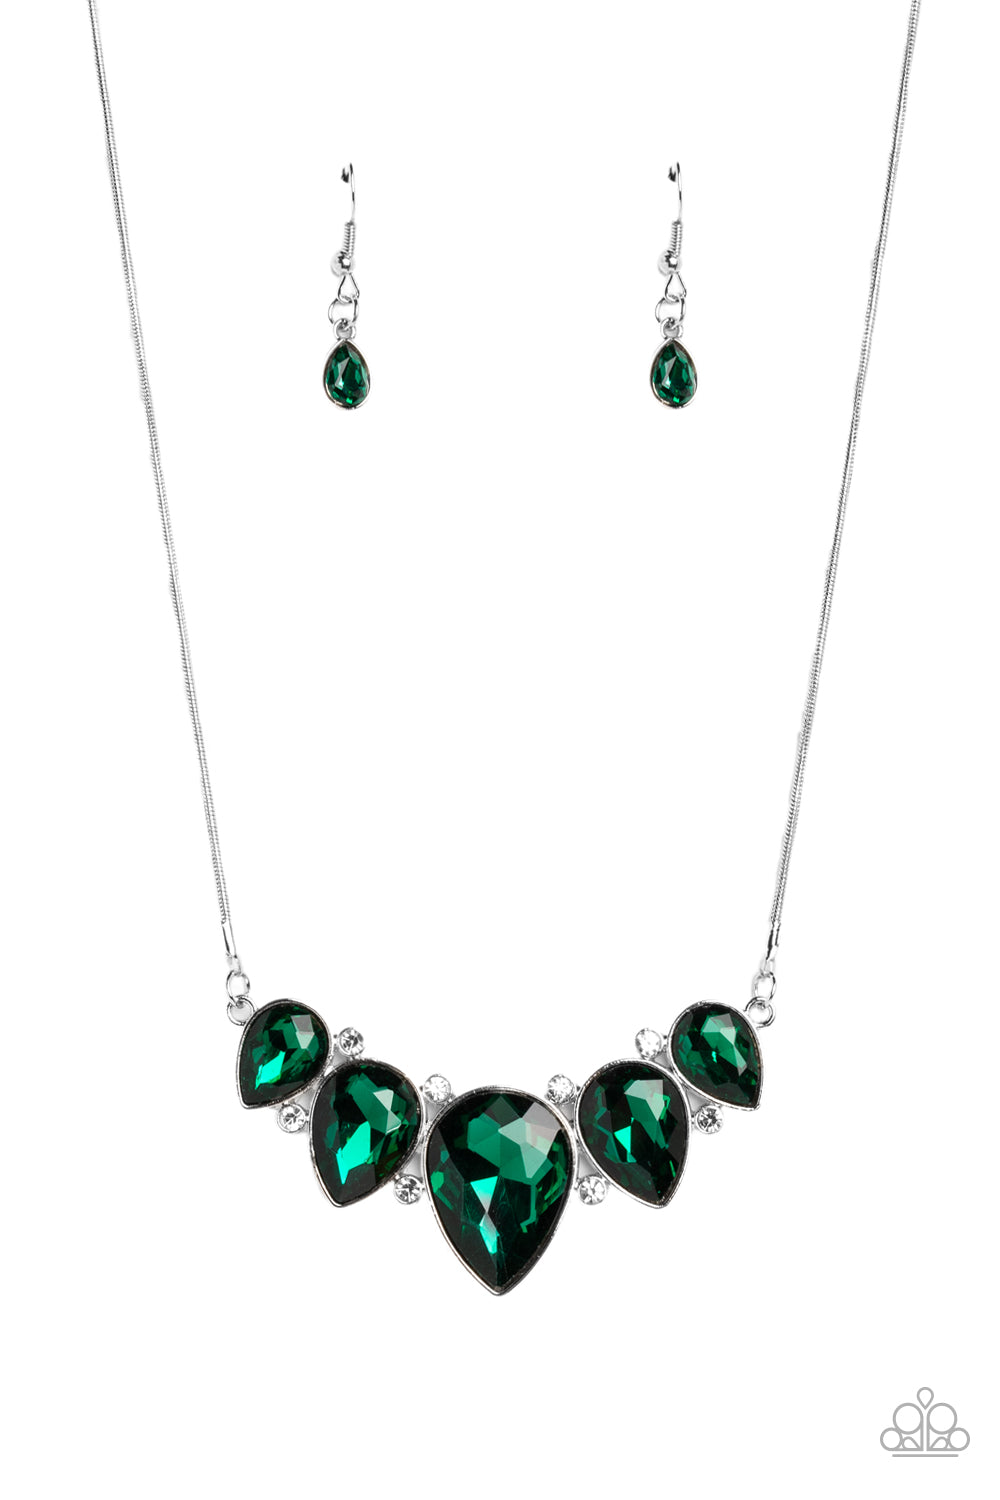 Regally Refined - Green Necklace